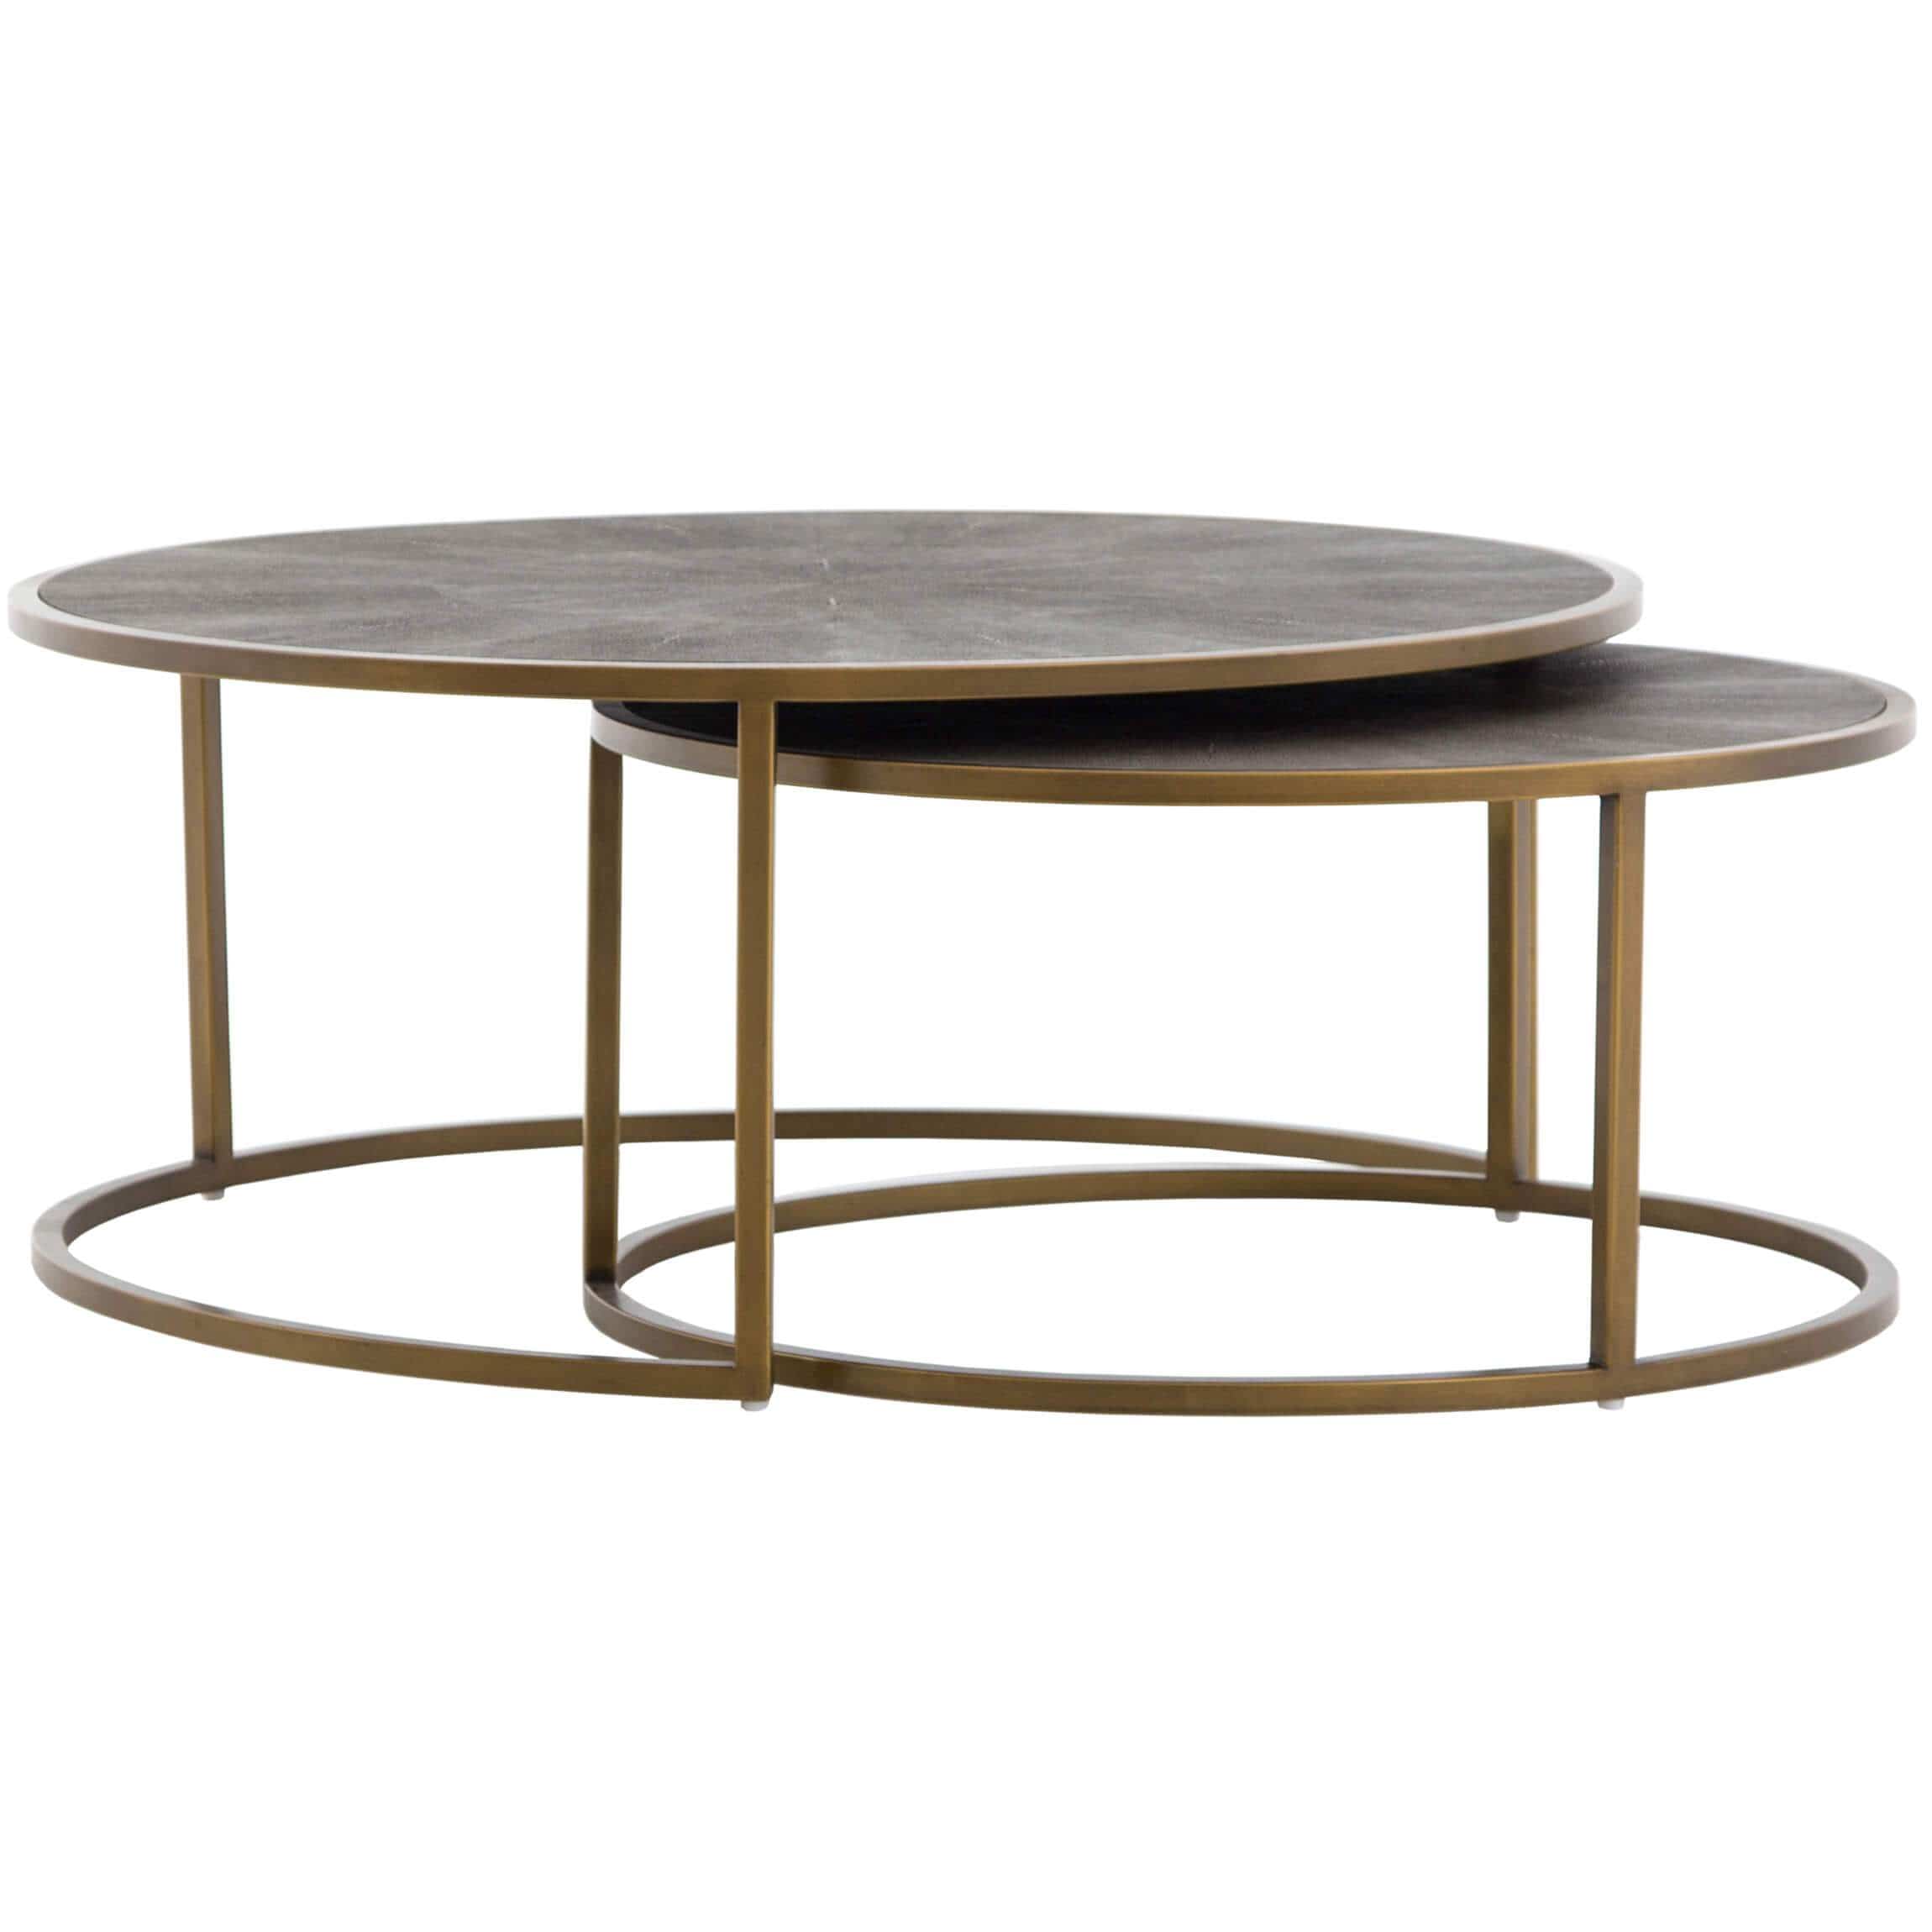 Image of Shagreen Nesting Coffee Table, Brass